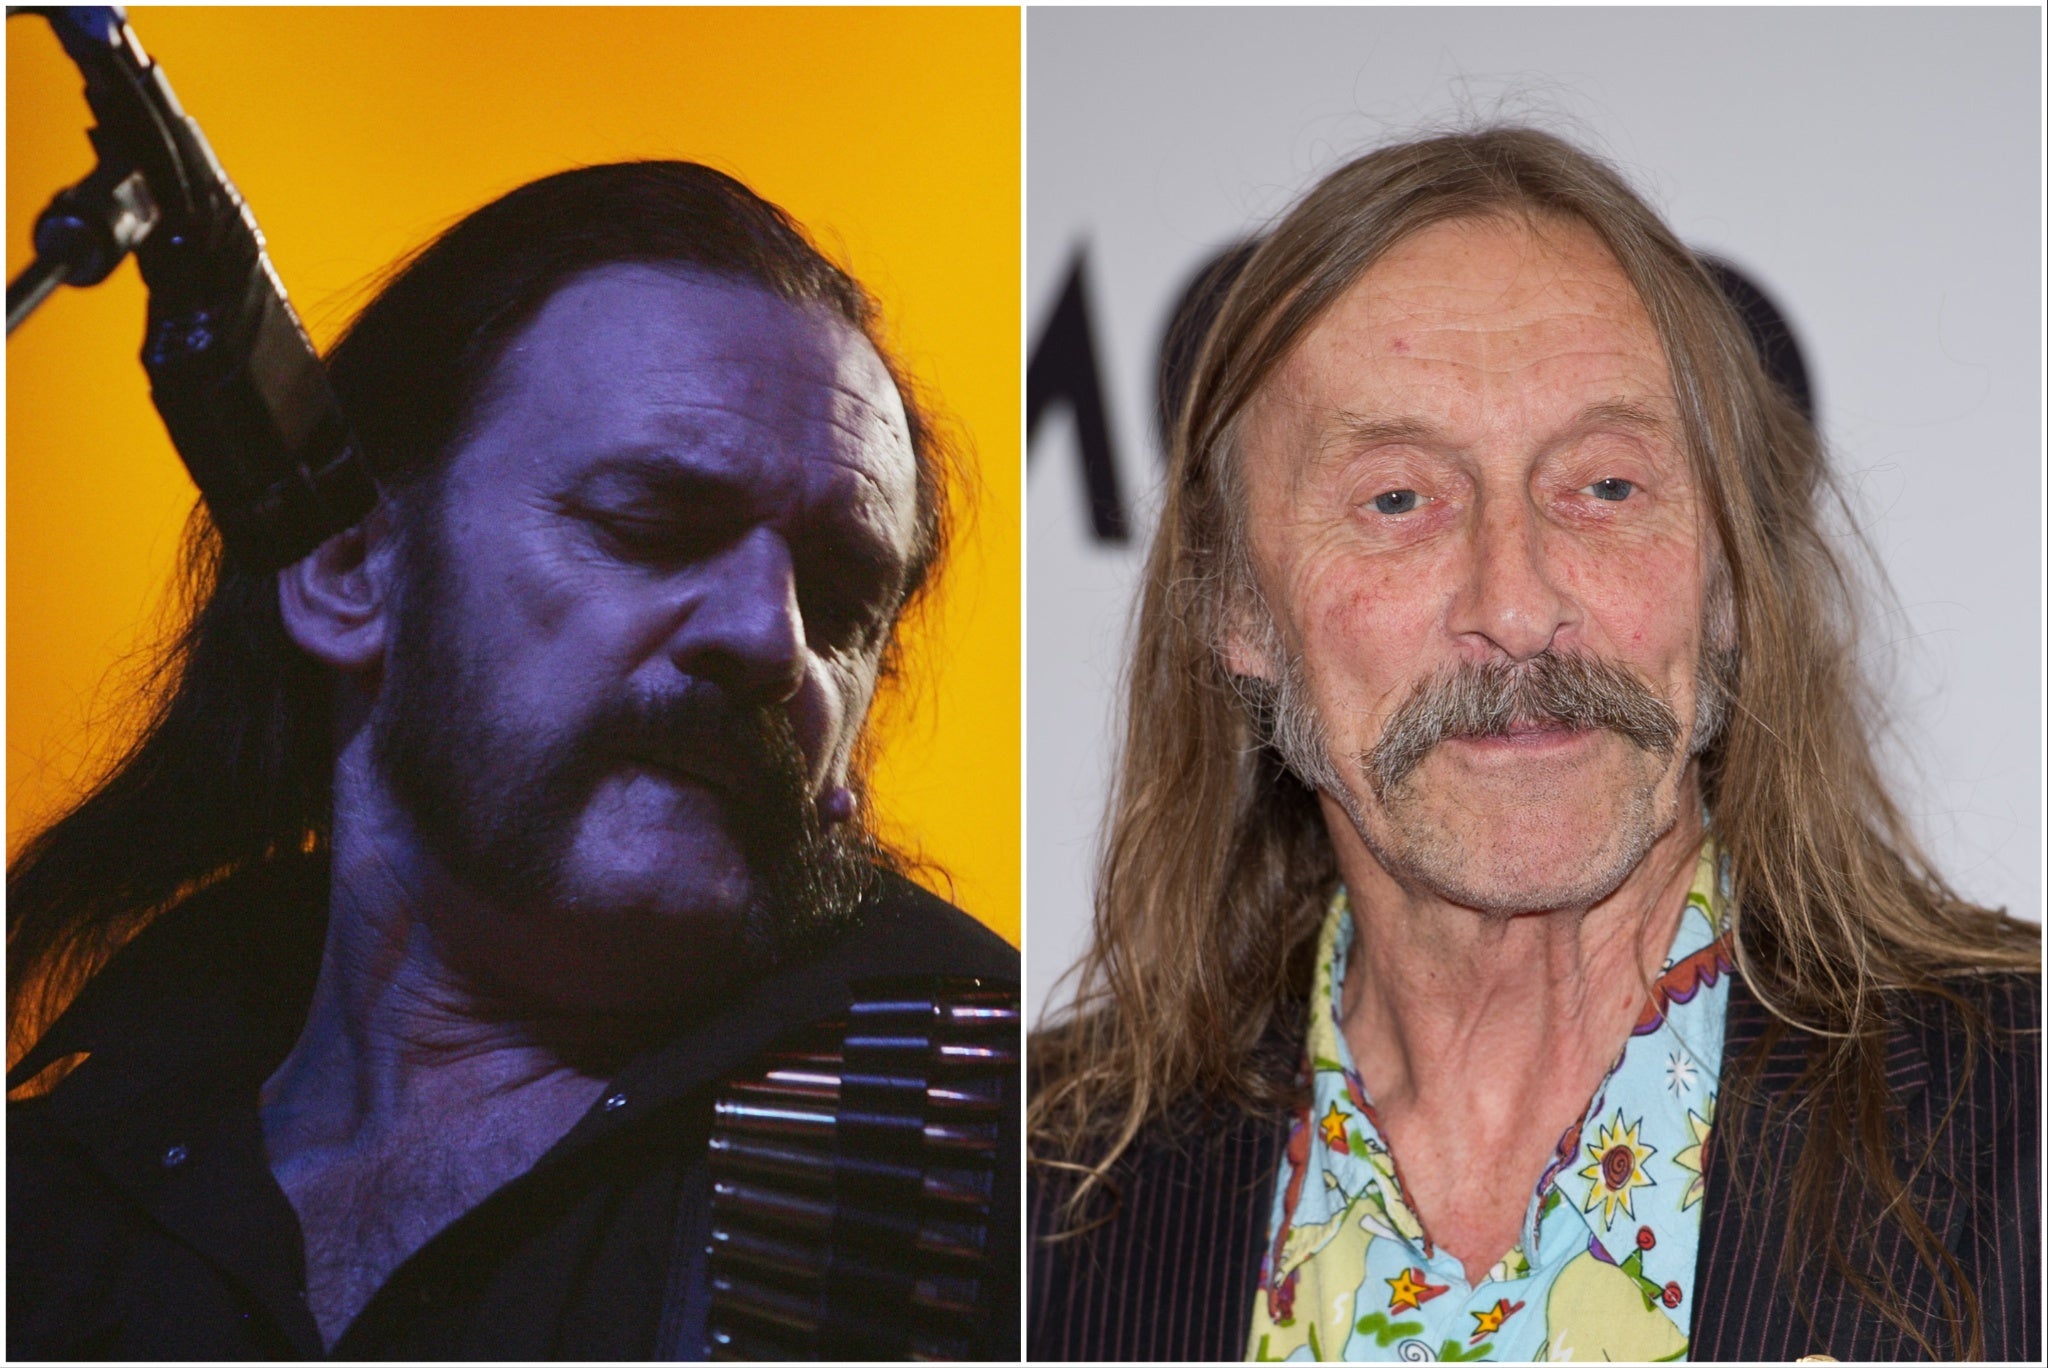 Lemmy was kicked out of Hawkwind after the Canada incident in 1975